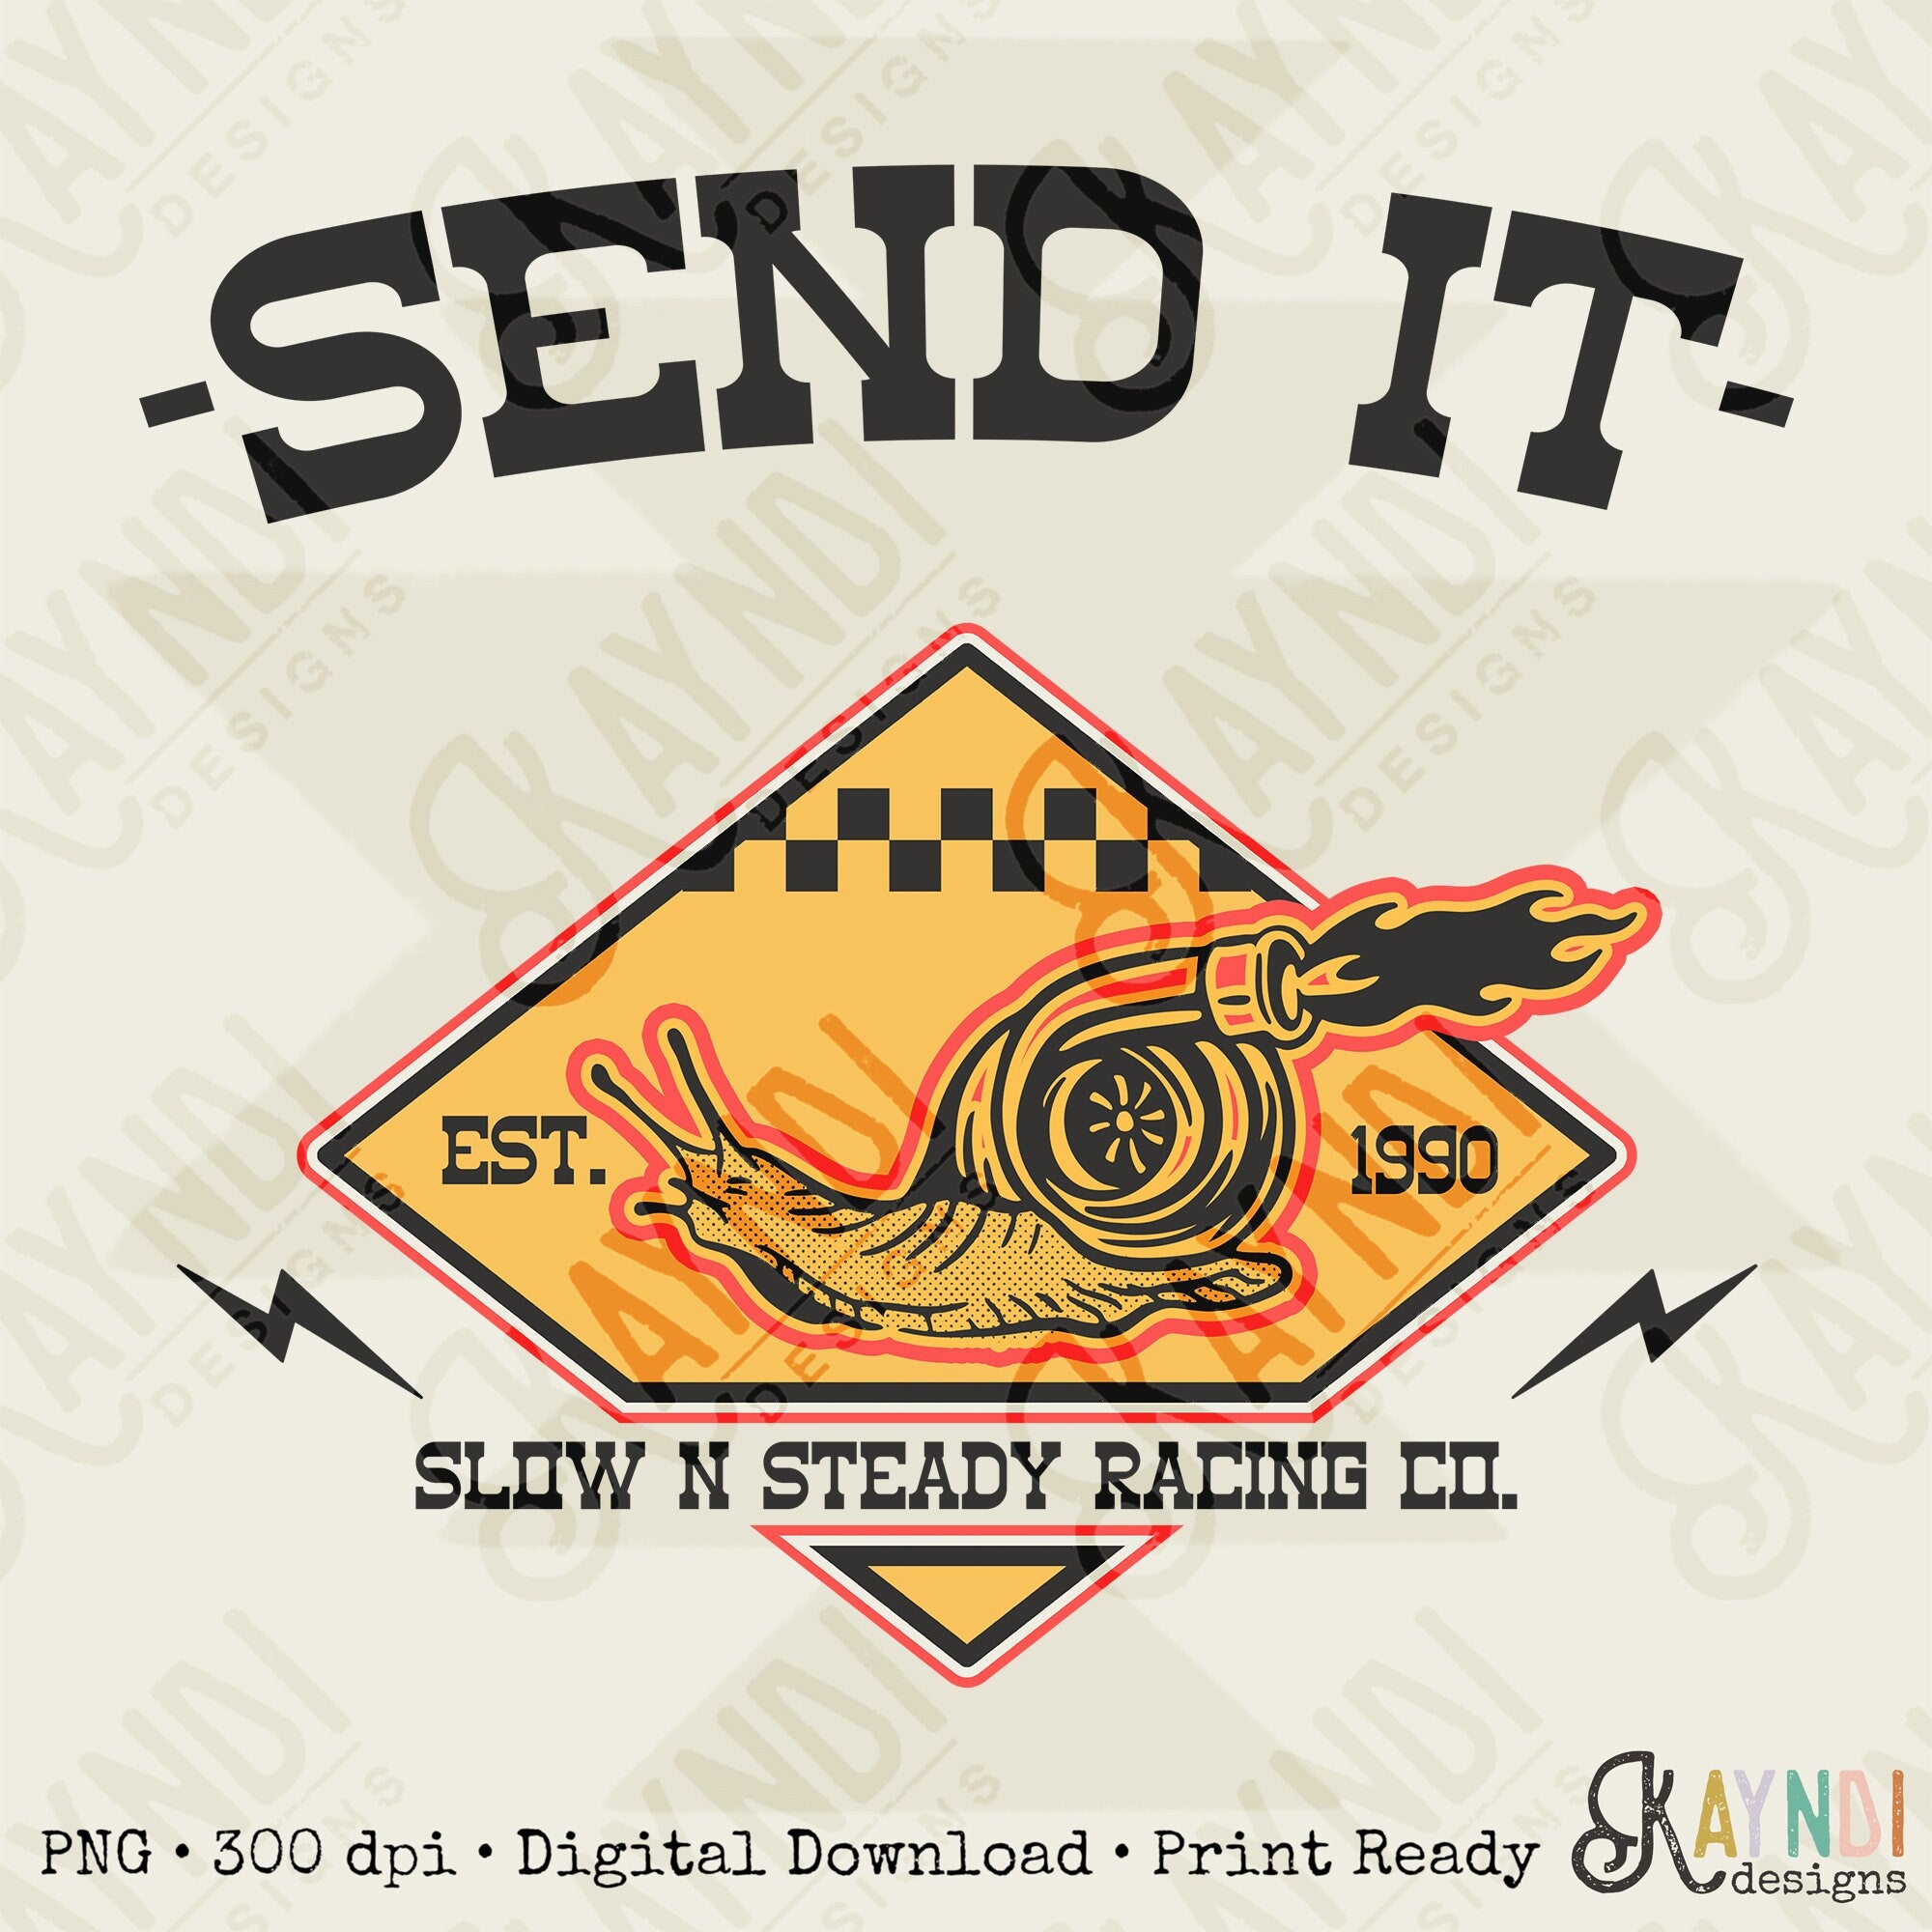 Send It Slow and Steady Racing Co Sublimation Design PNG Digital Download Printable Mens Guys Motocross Supercross Race Car Mechanic Retro